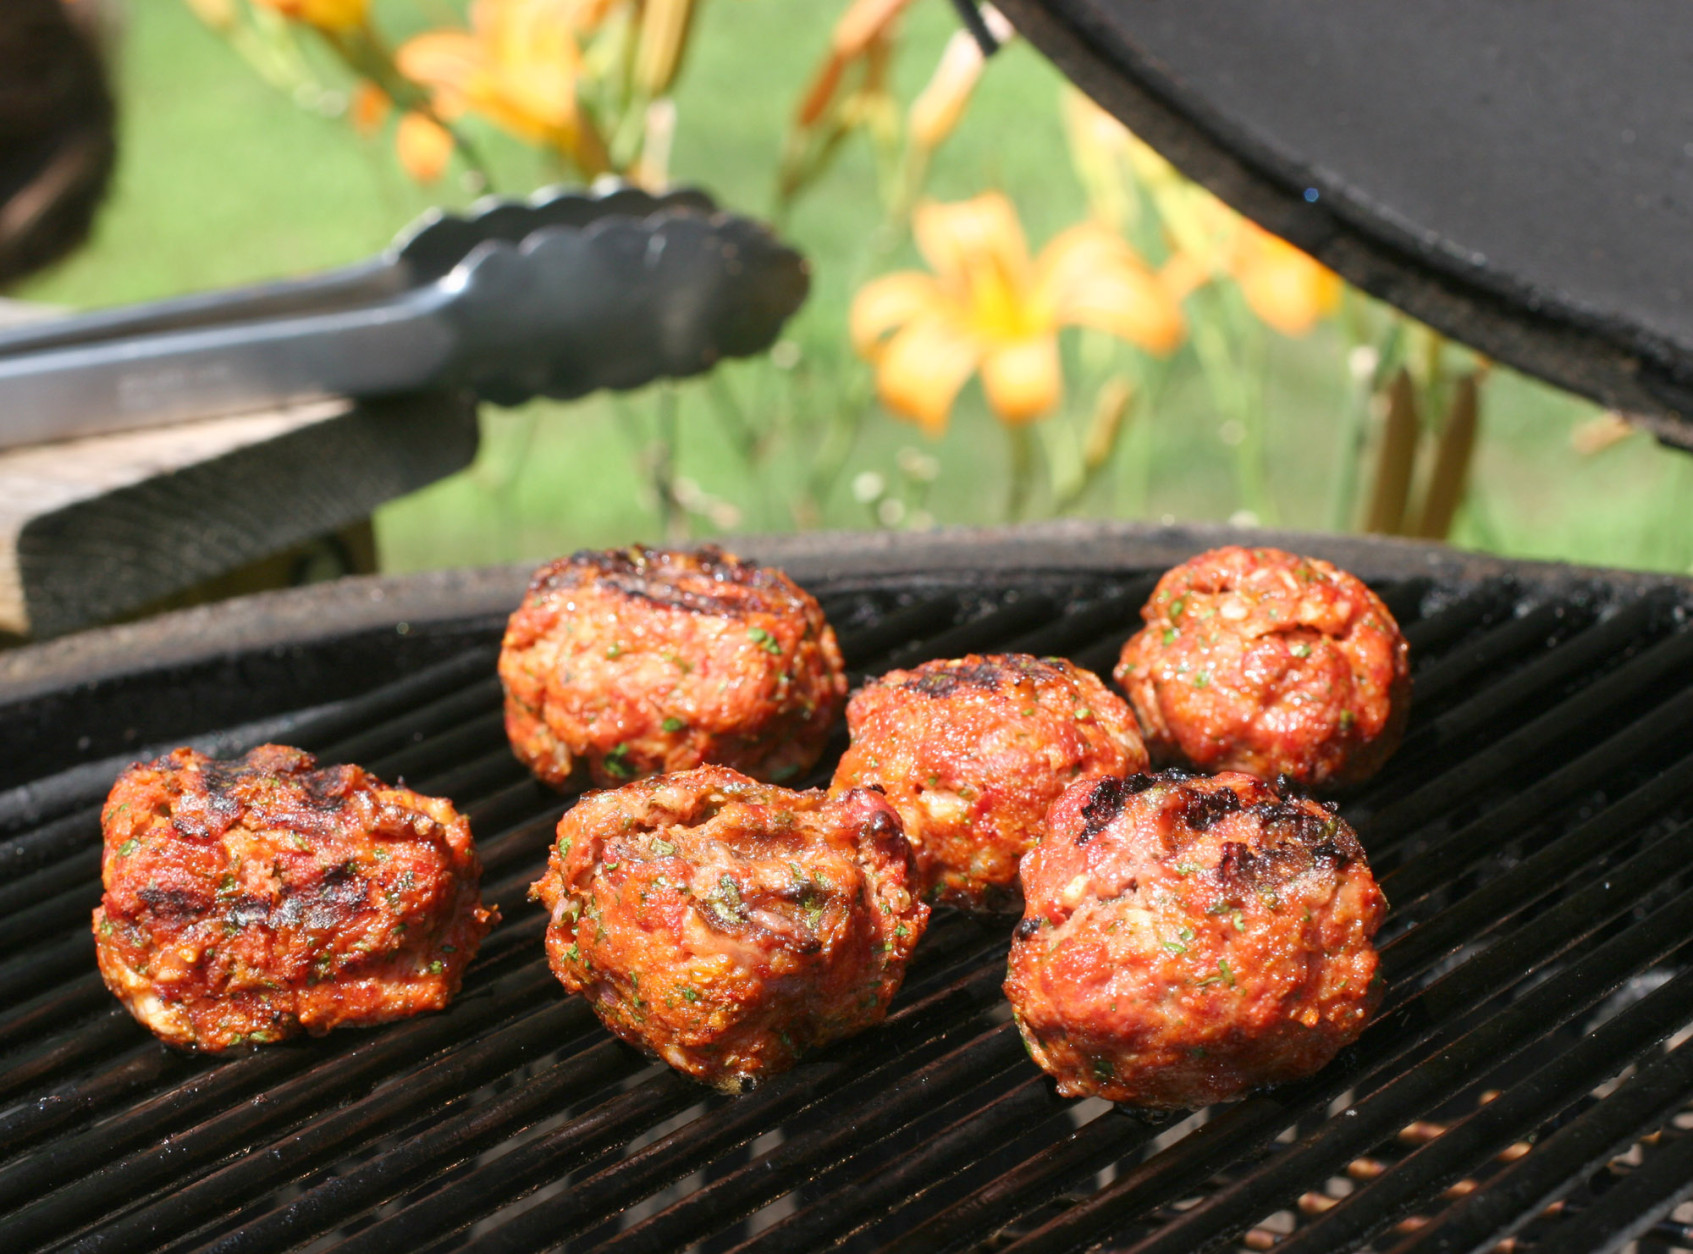 ** FOR USE WITH AP WEEKLY FEATURES **   Grilled Meatballs may sound like an odd idea, but this quick recipe has distinct tomato and savory notes and produces meatballs with tons of flavor that can be cooked entirely on the grill. For a great sandwich, toss slices of provolone cheese over them during the final minute of grilling. (AP Photo/Larry Crowe)